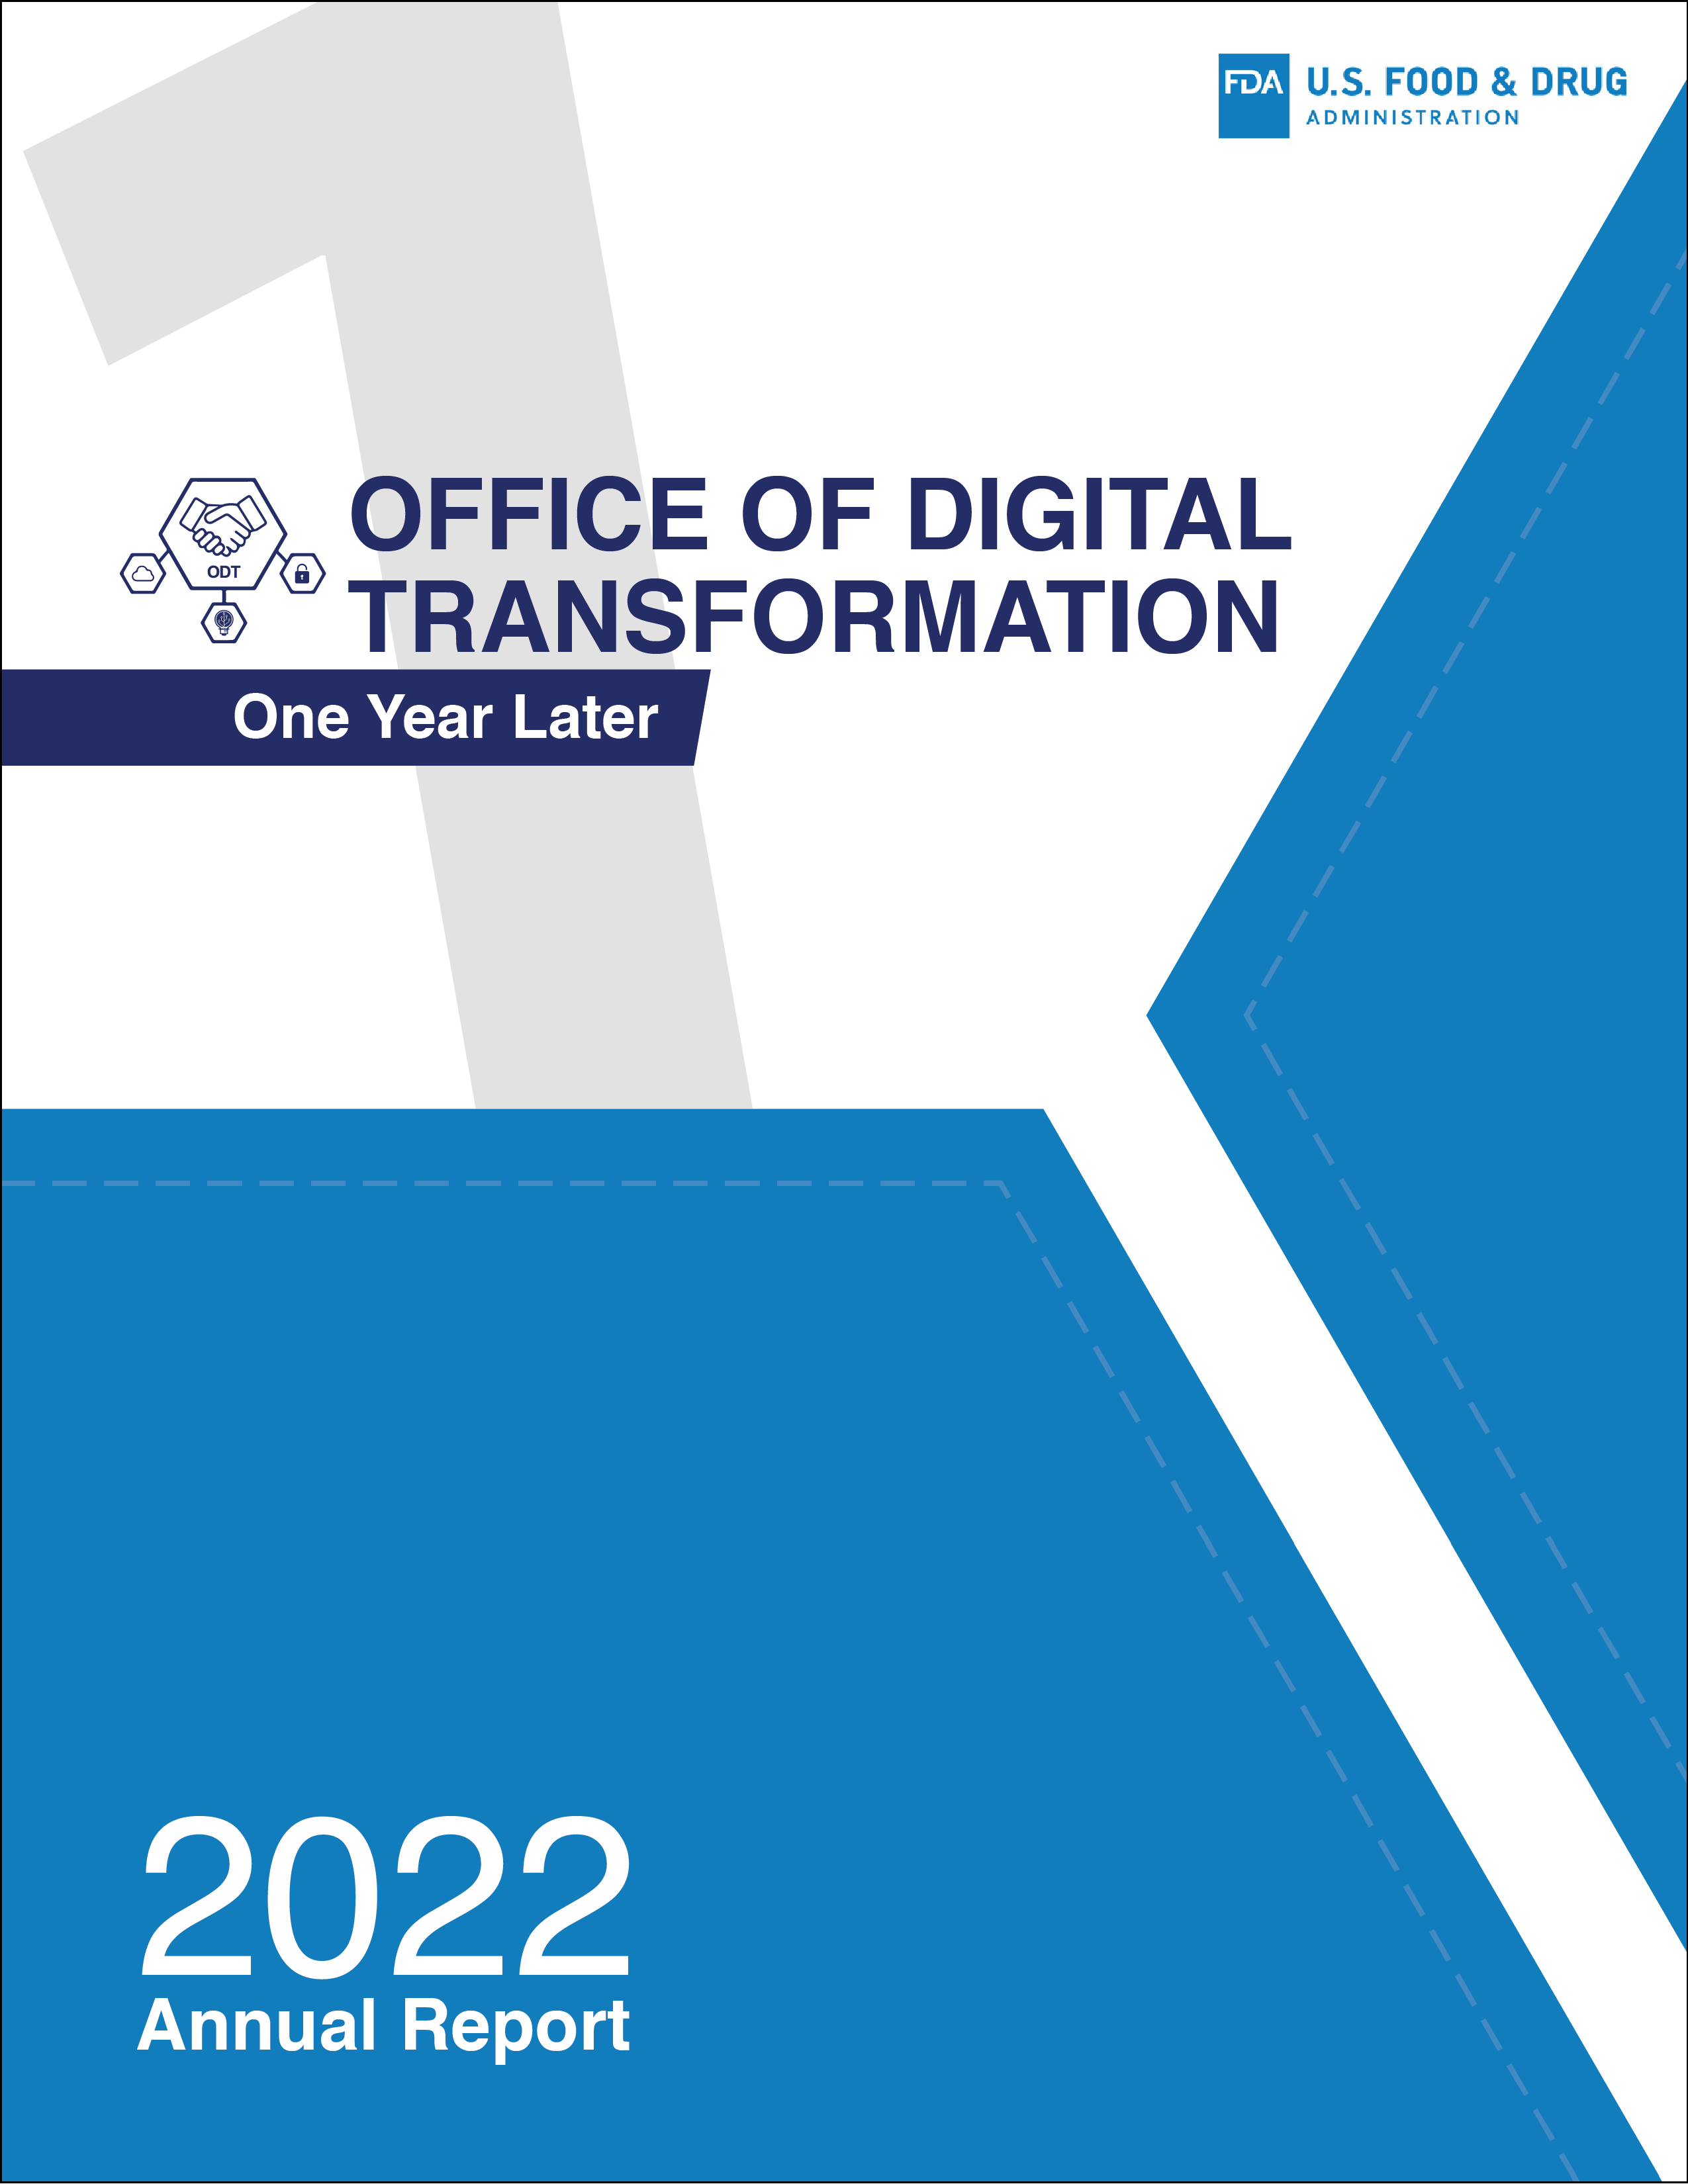 Office of Digital Transformation Annual Report 2022